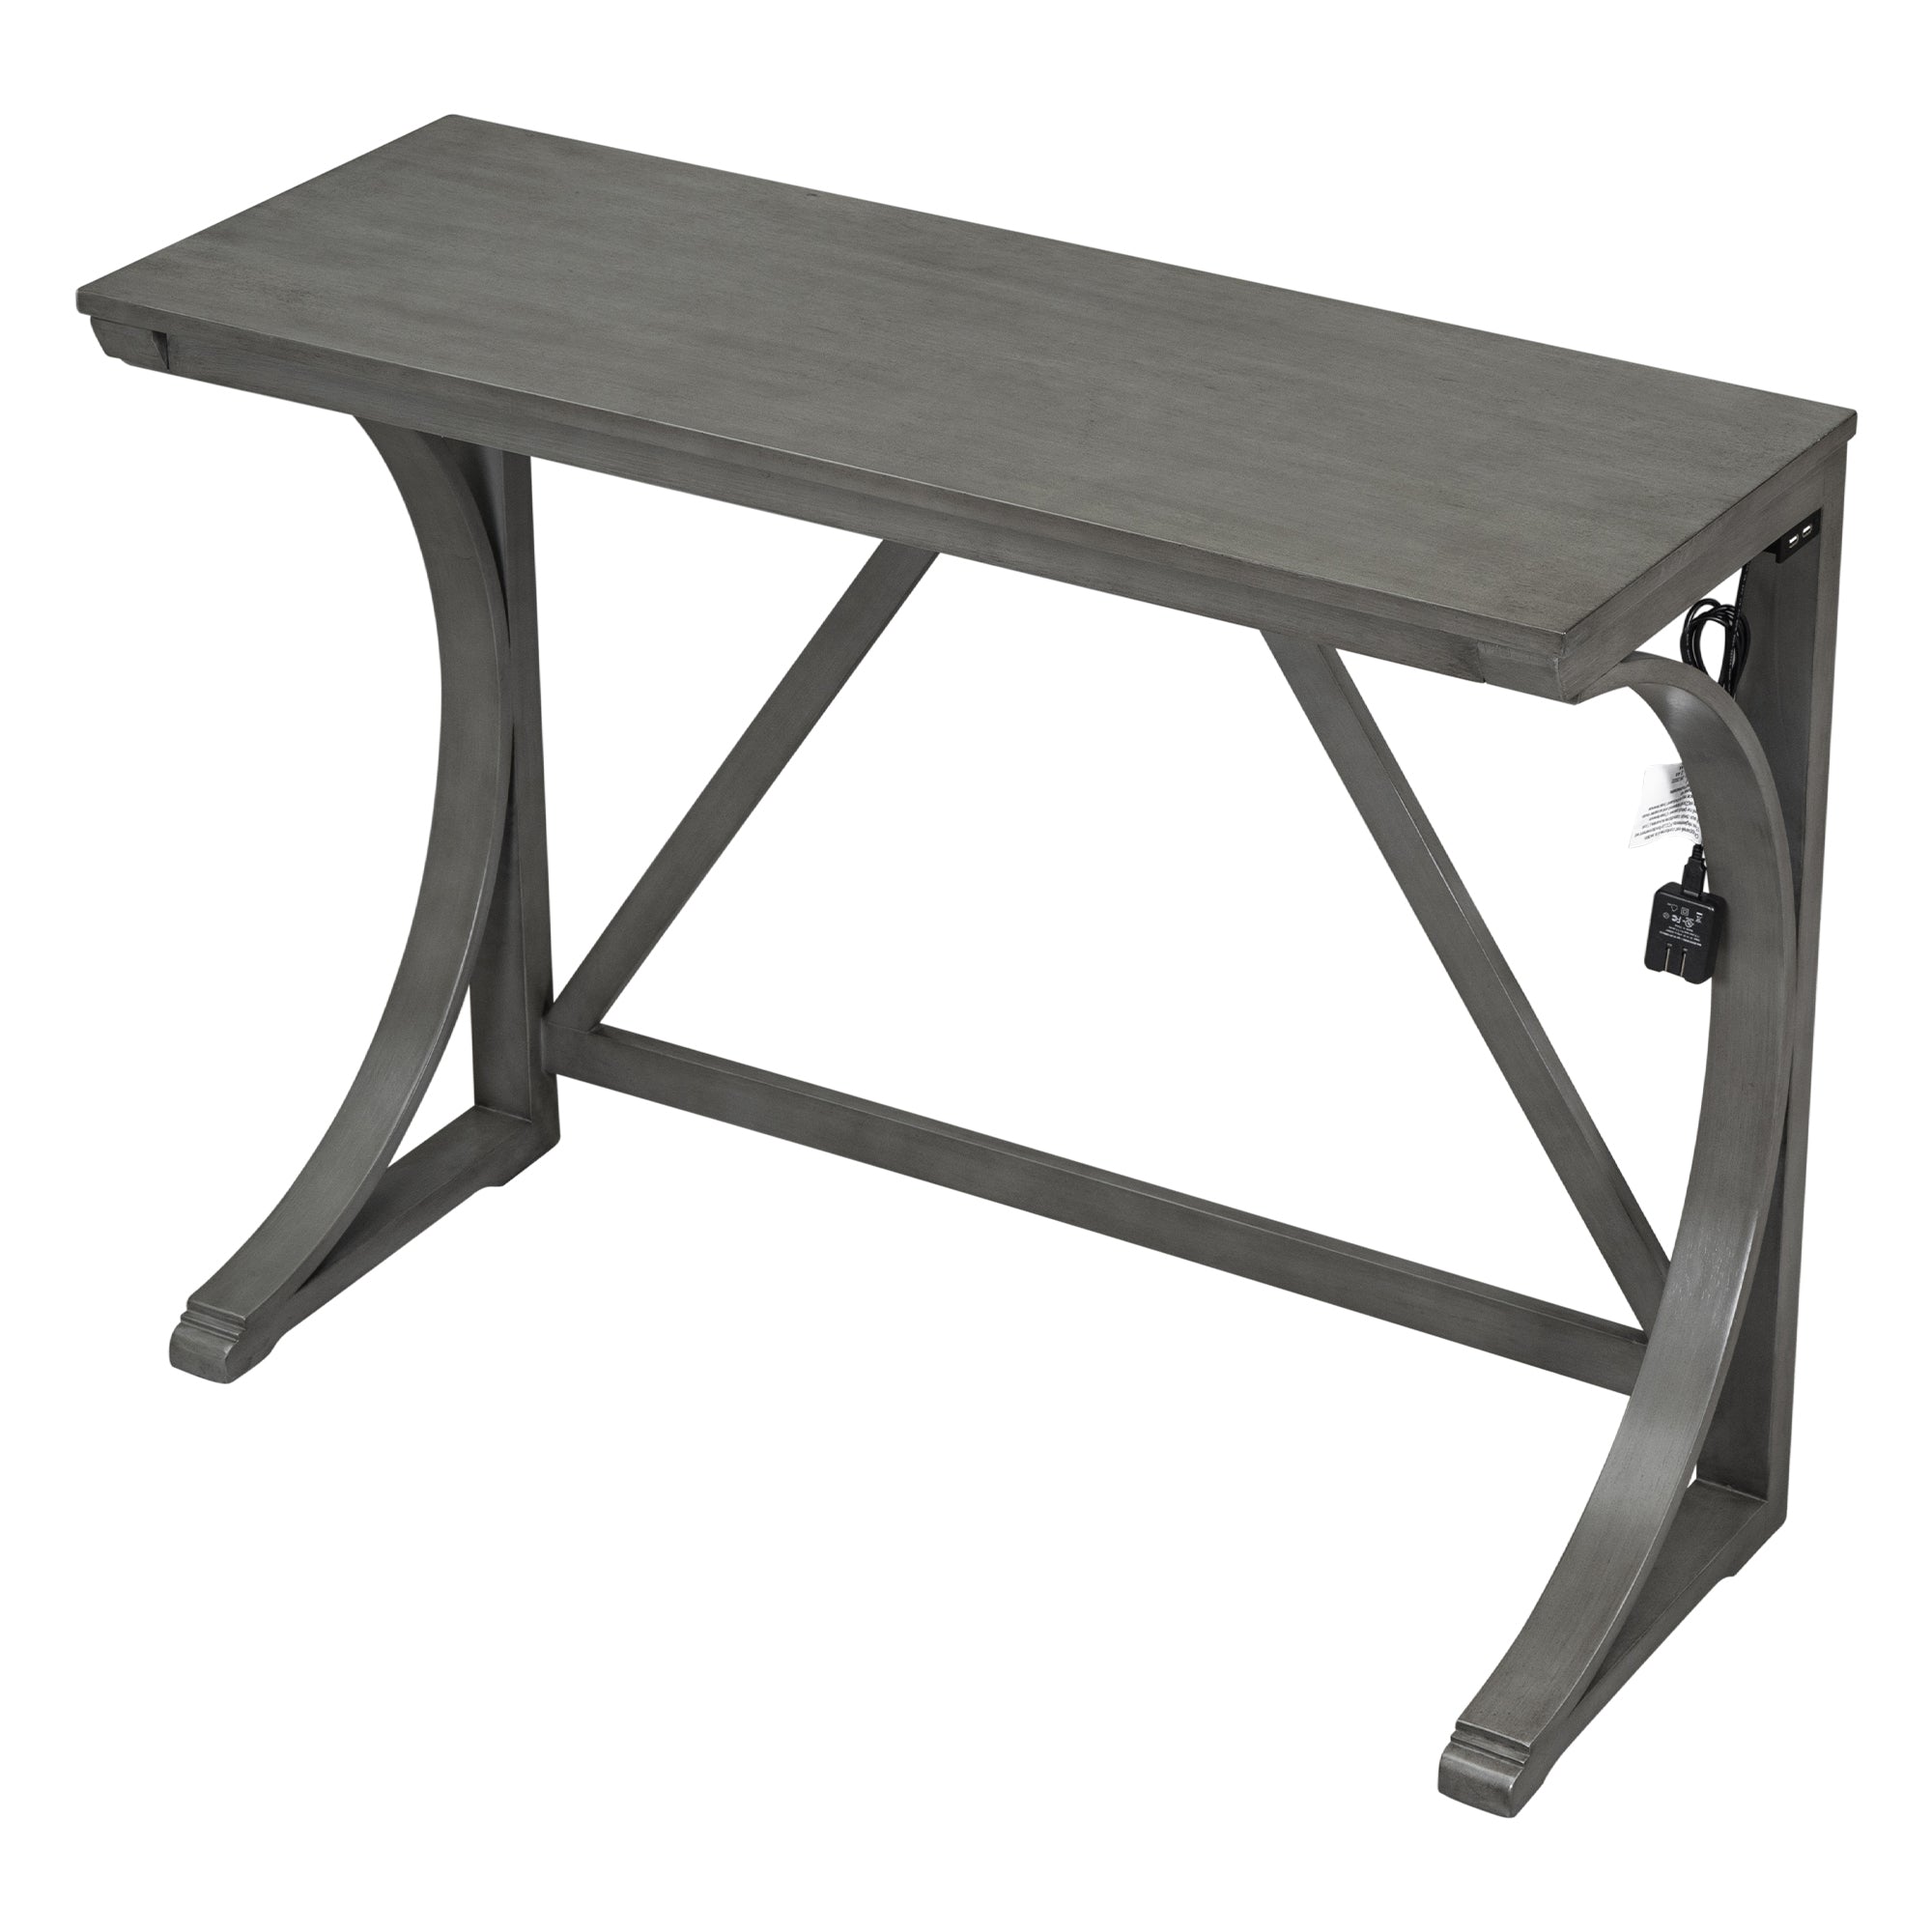 Farmhouse 3 Piece Counter Height Dining Table gray-wood-dining room-solid